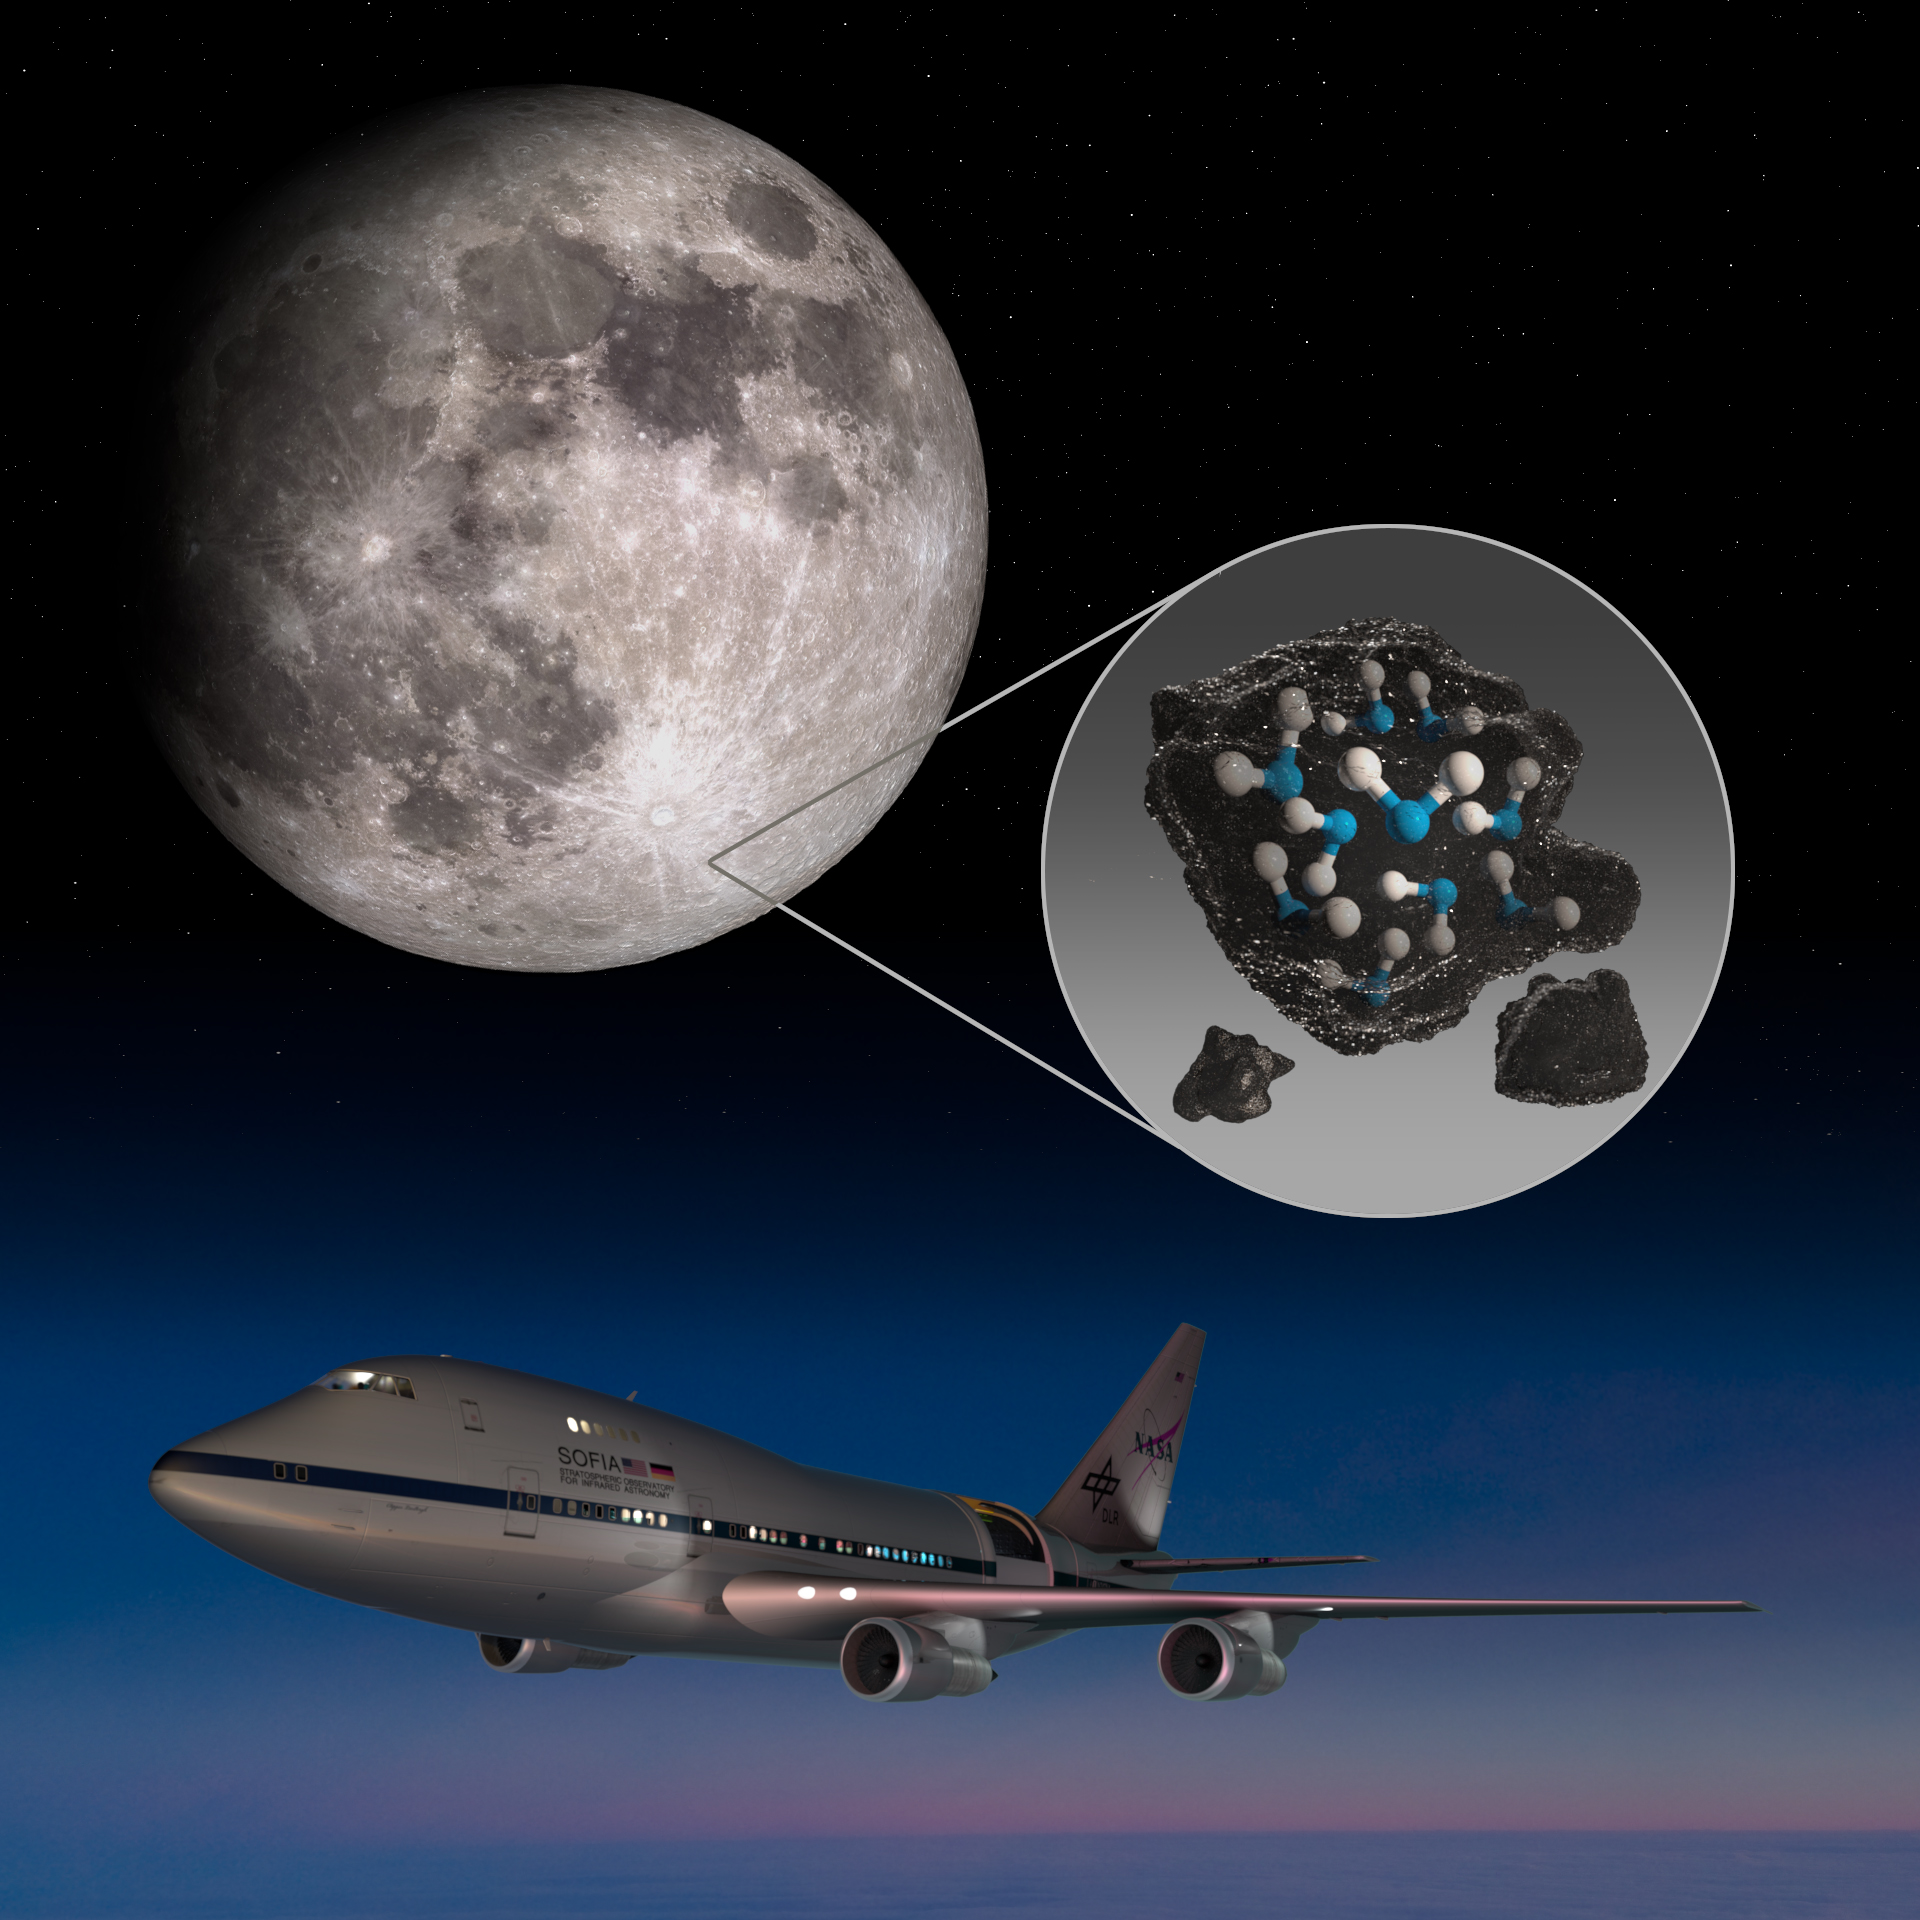 Image of Moon and illustration depicting water trapped in lunar soil and NASA’s Stratospheric Observatory for Infrared Astronomy